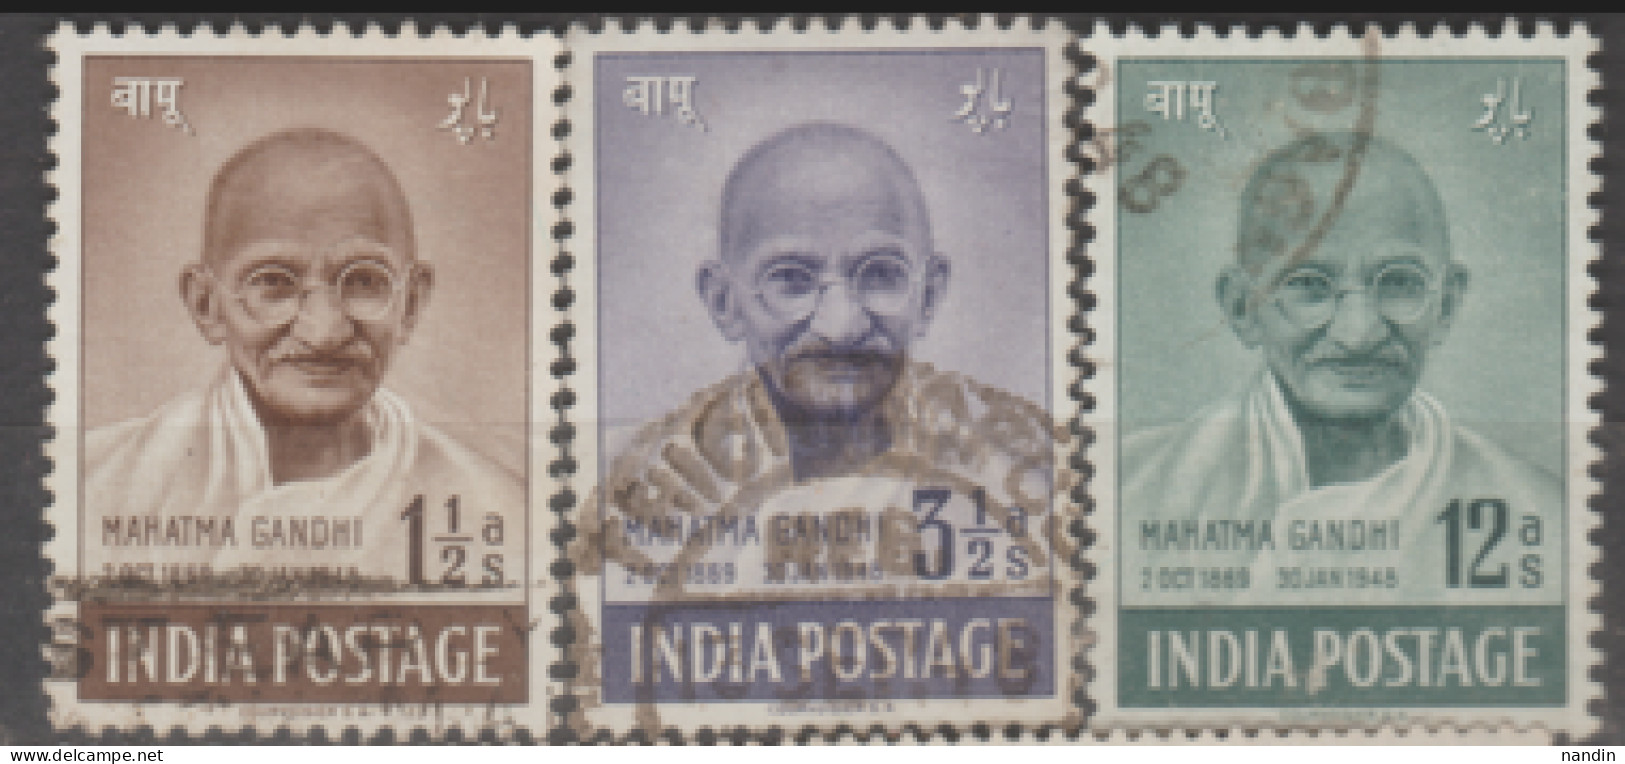 USED STAMP FROM 1948 INDIA ON GANDHI ON 1ST ANNEVERSARY OF INDEPENDENT(15TH AUG 1948) - Used Stamps